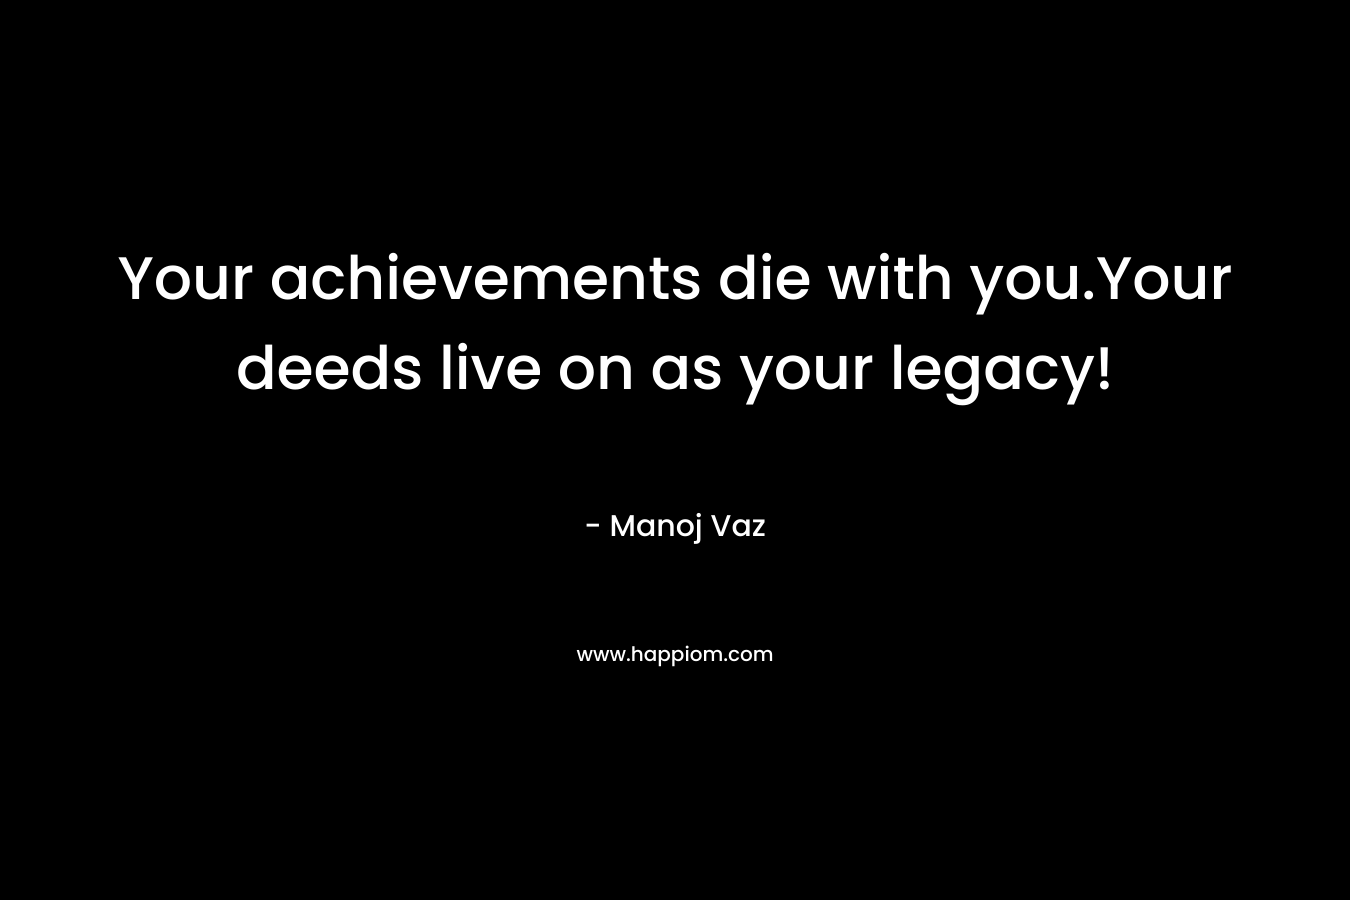 Your achievements die with you.Your deeds live on as your legacy! – Manoj Vaz